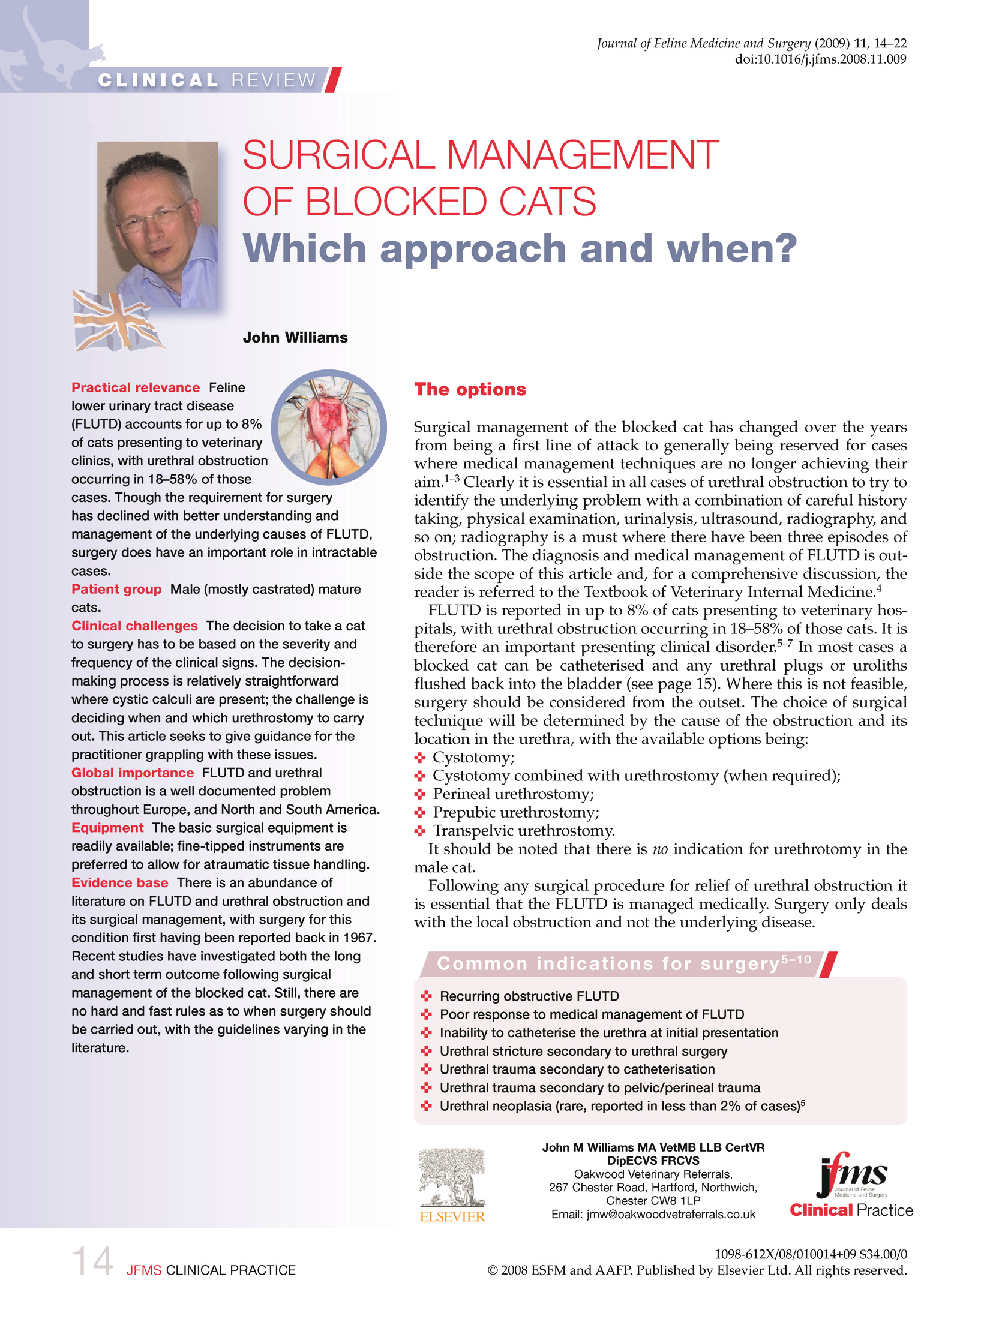 Surgical management of blocked cats